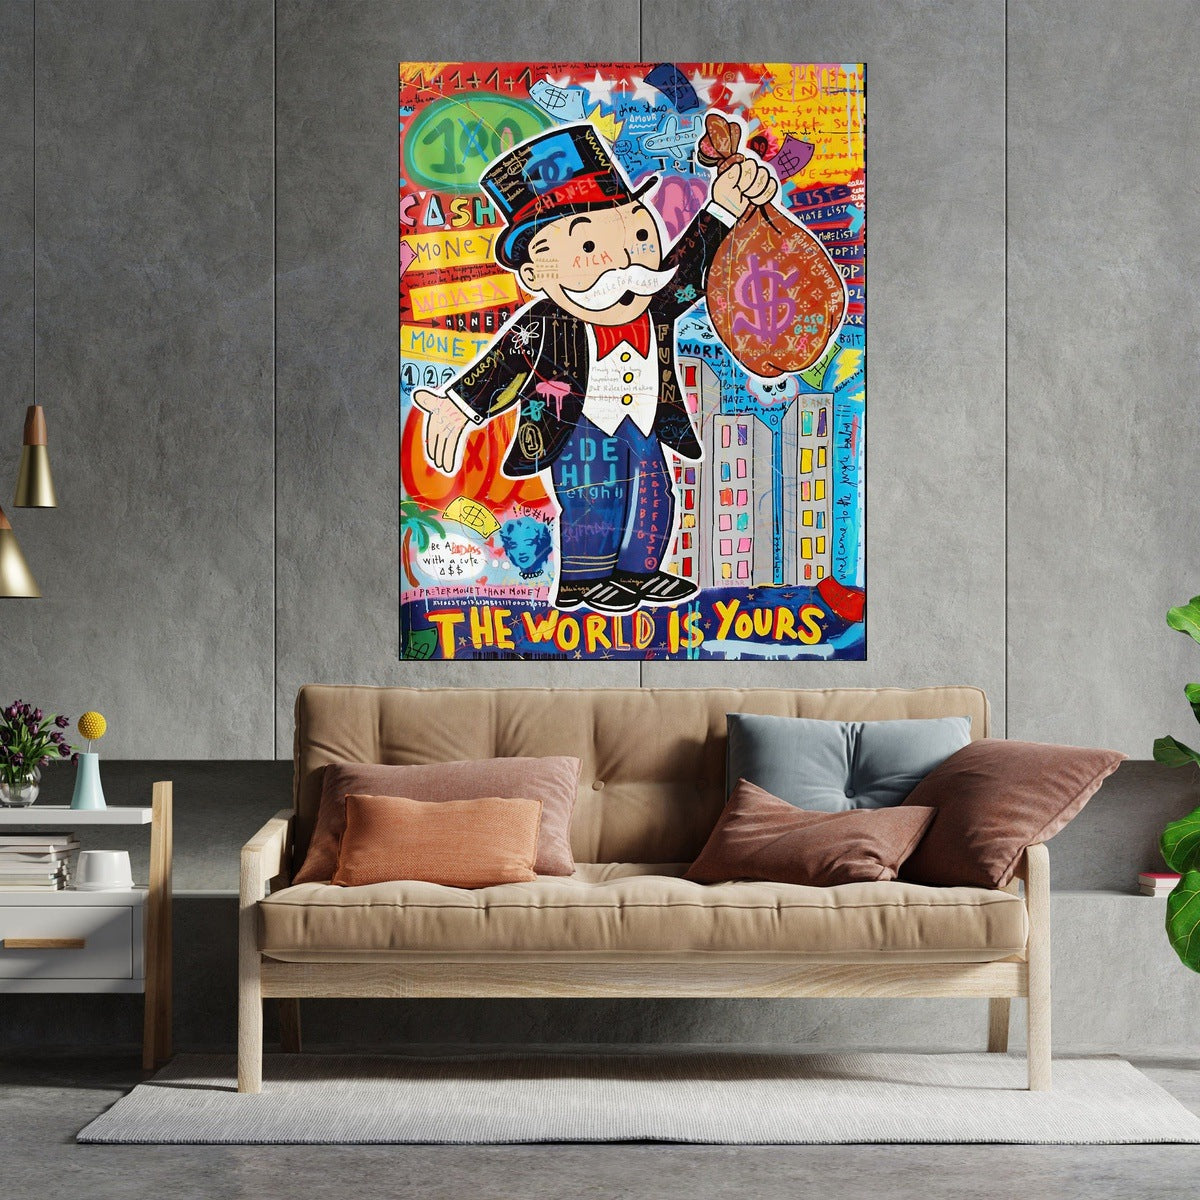 The World Is Yours - Alec Monopoly Pop Art Graffiti